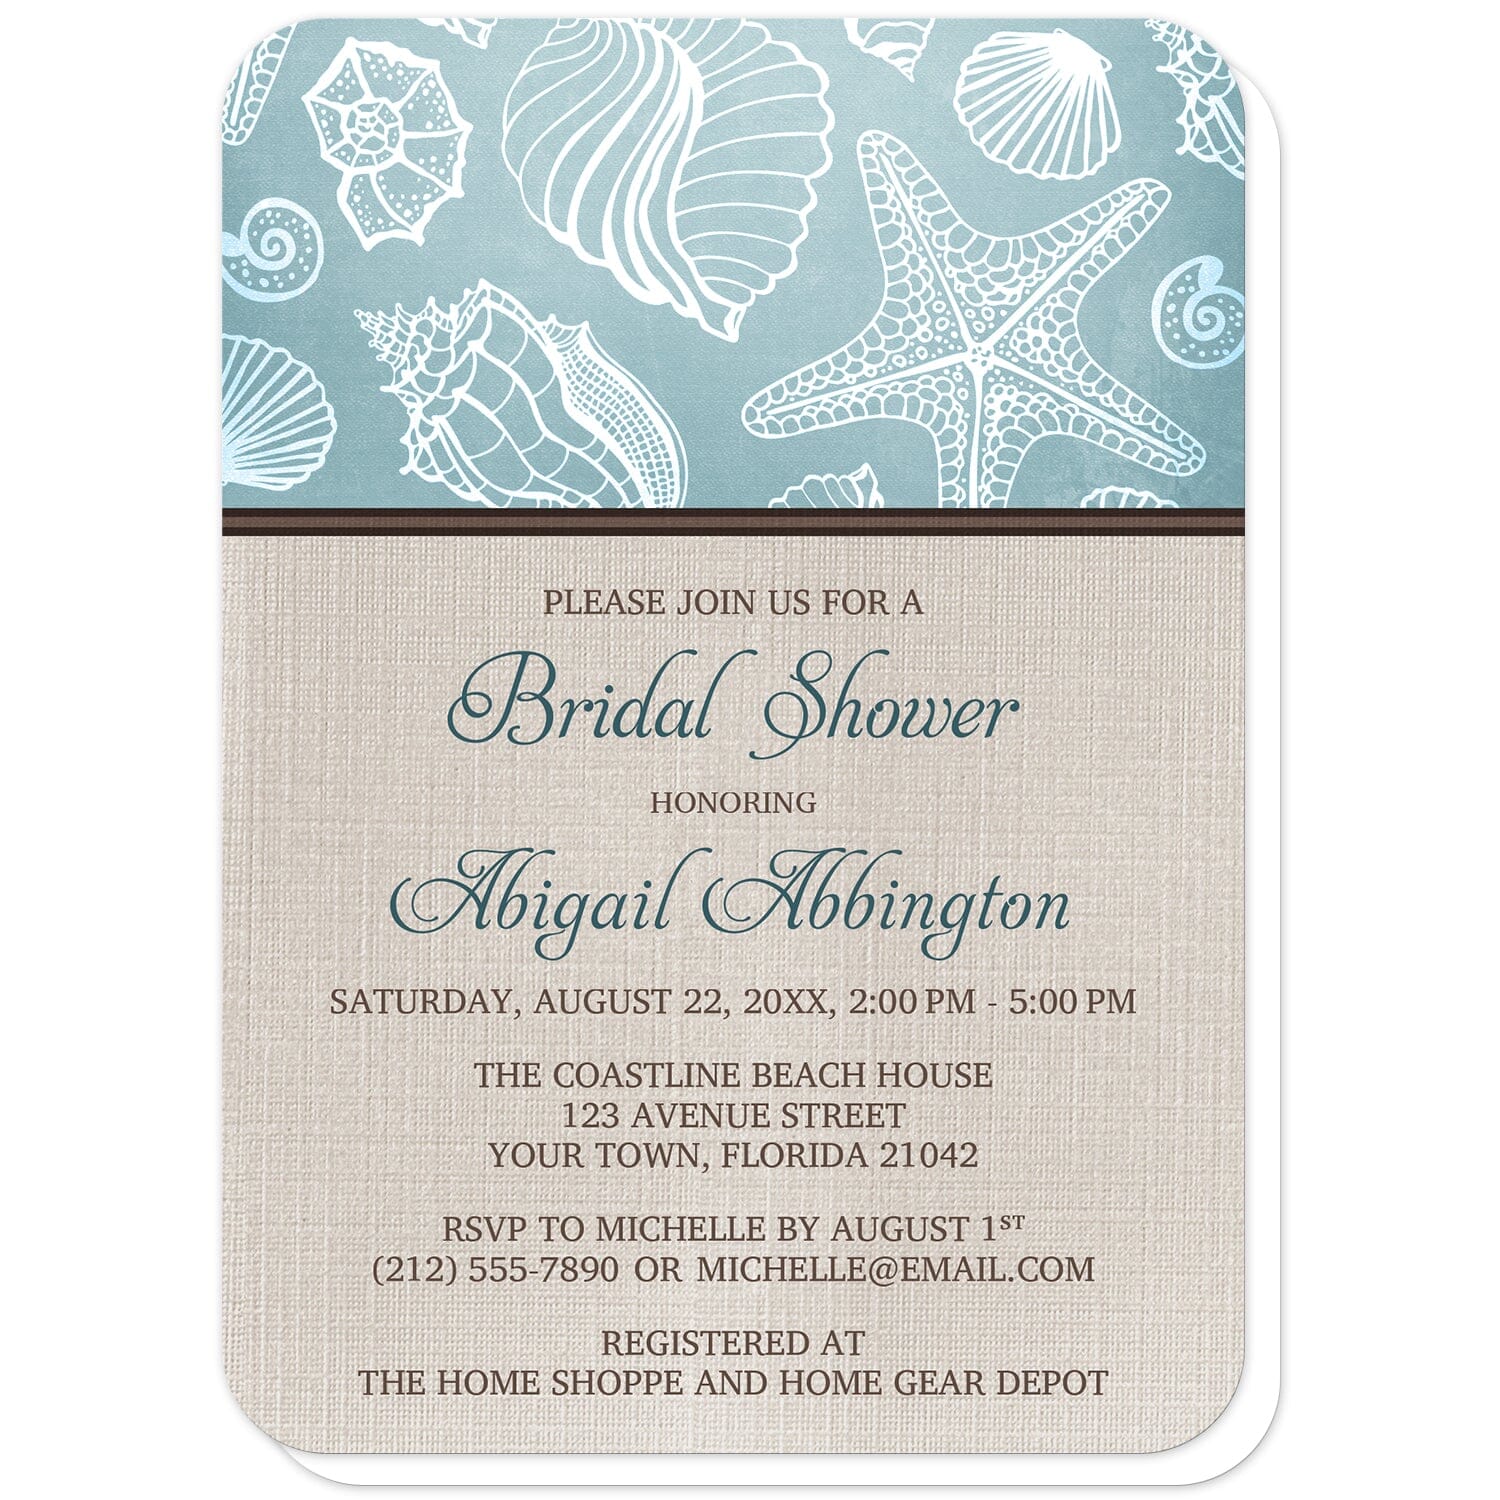 Rustic Beach Linen Seashell Bridal Shower Invitations (with rounded corners) at Artistically Invited. Rustic beach linen seashell bridal shower invitations with a white line seashell pattern over a beachy turquoise background along the top. Your personalized bridal shower celebration details are custom printed in dark turquoise and brown over a beige canvas background design below the seashell pattern.